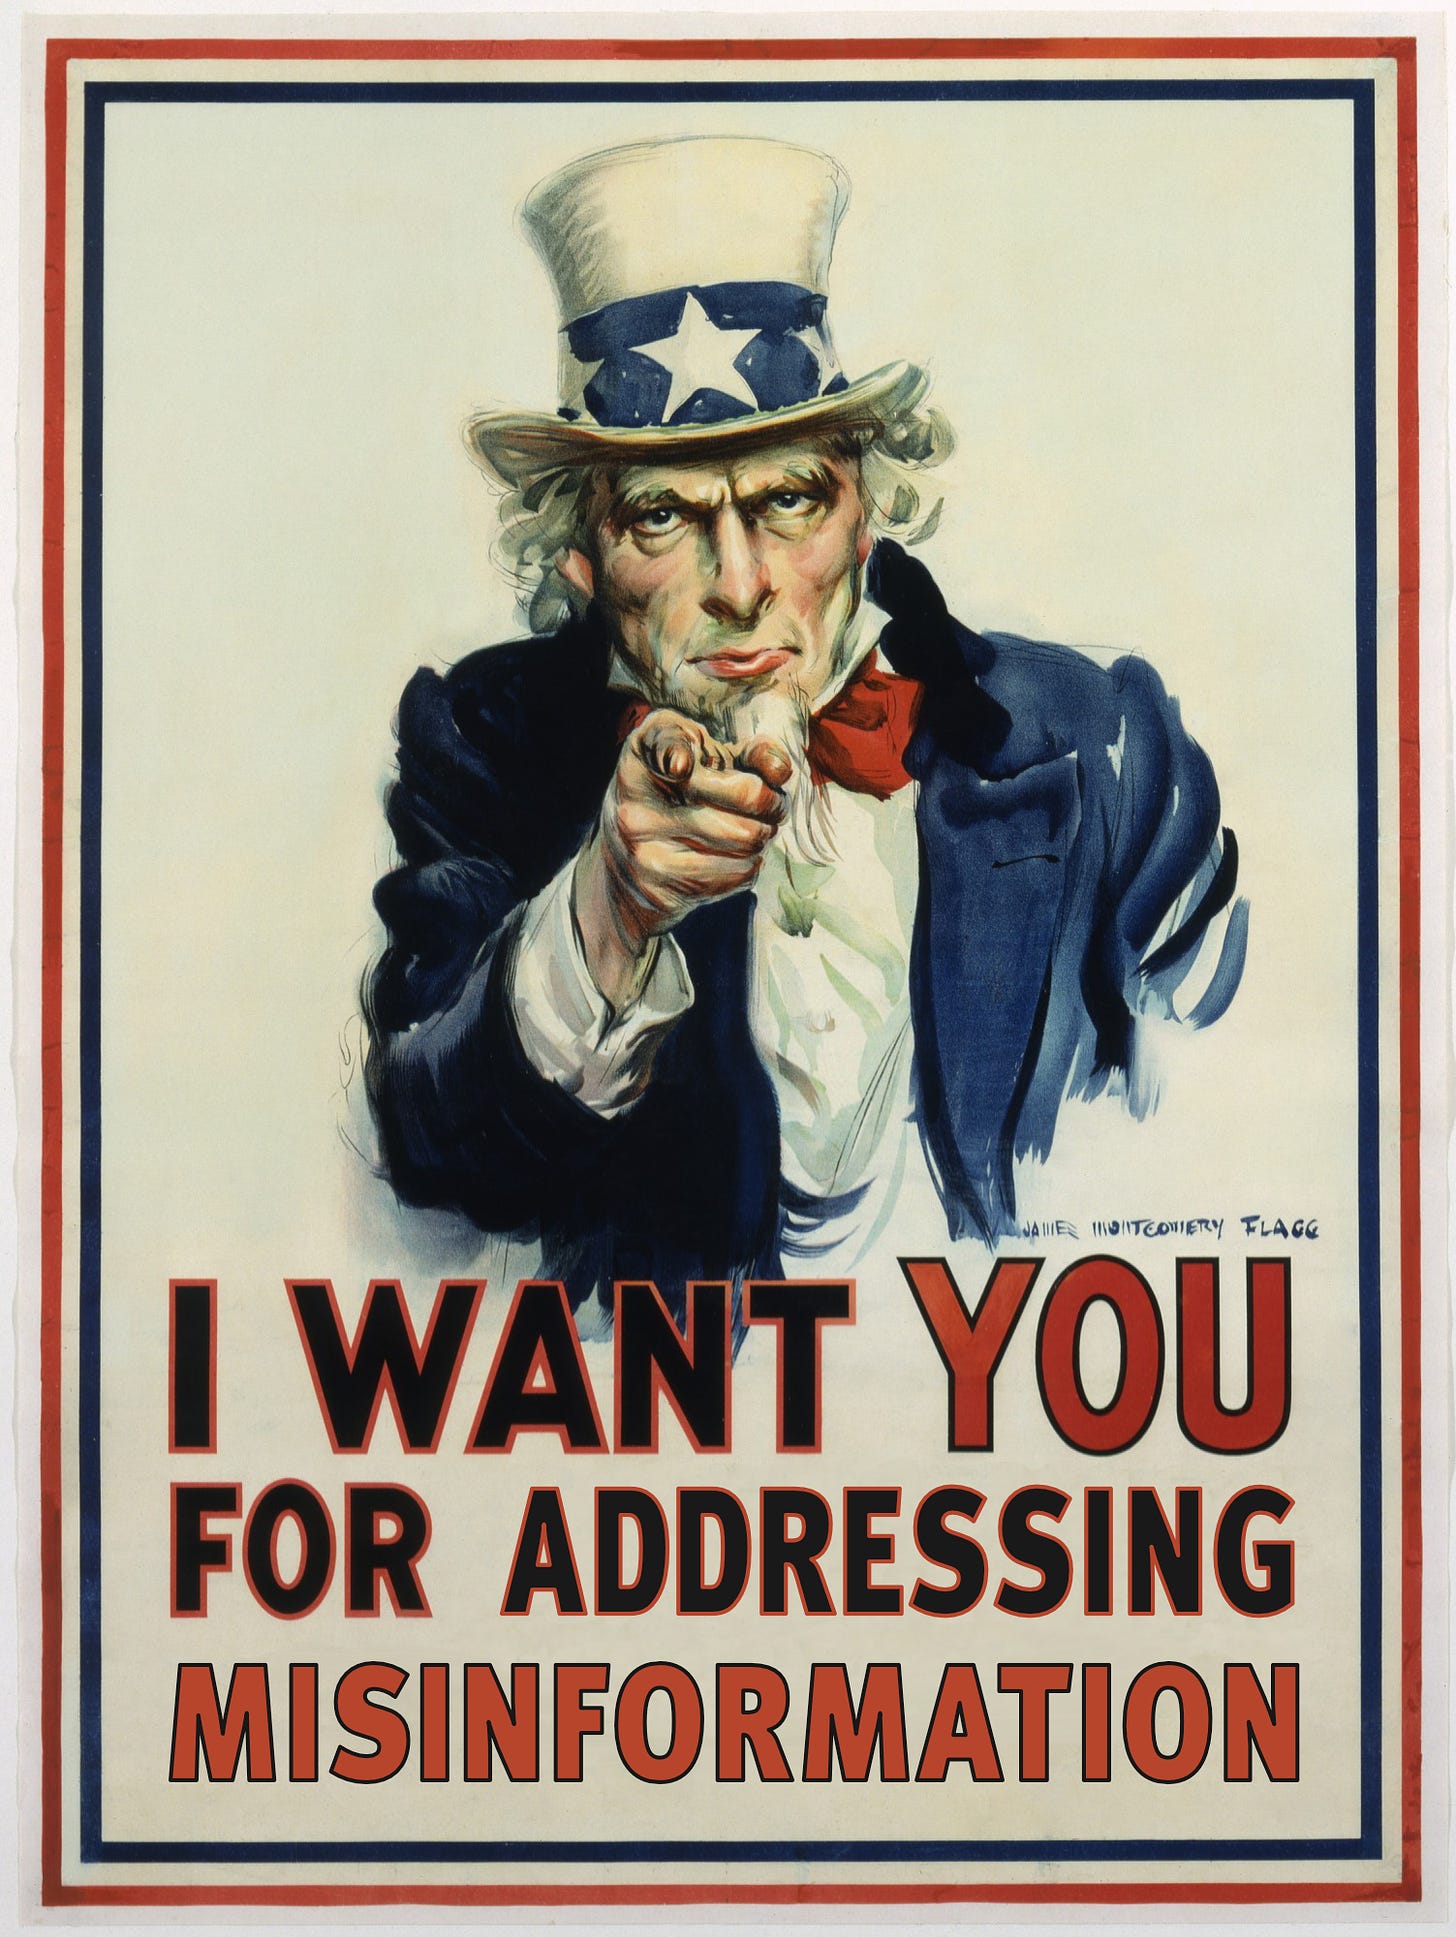 A digitally manipulated version of the famous recruitment poster with Uncle Sam pointing at the viewer and the text “I WANT YOU FOR U.S. ARMY.” This version says “I WANT YOU FOR ADDRESSING MISINFORMATION.”